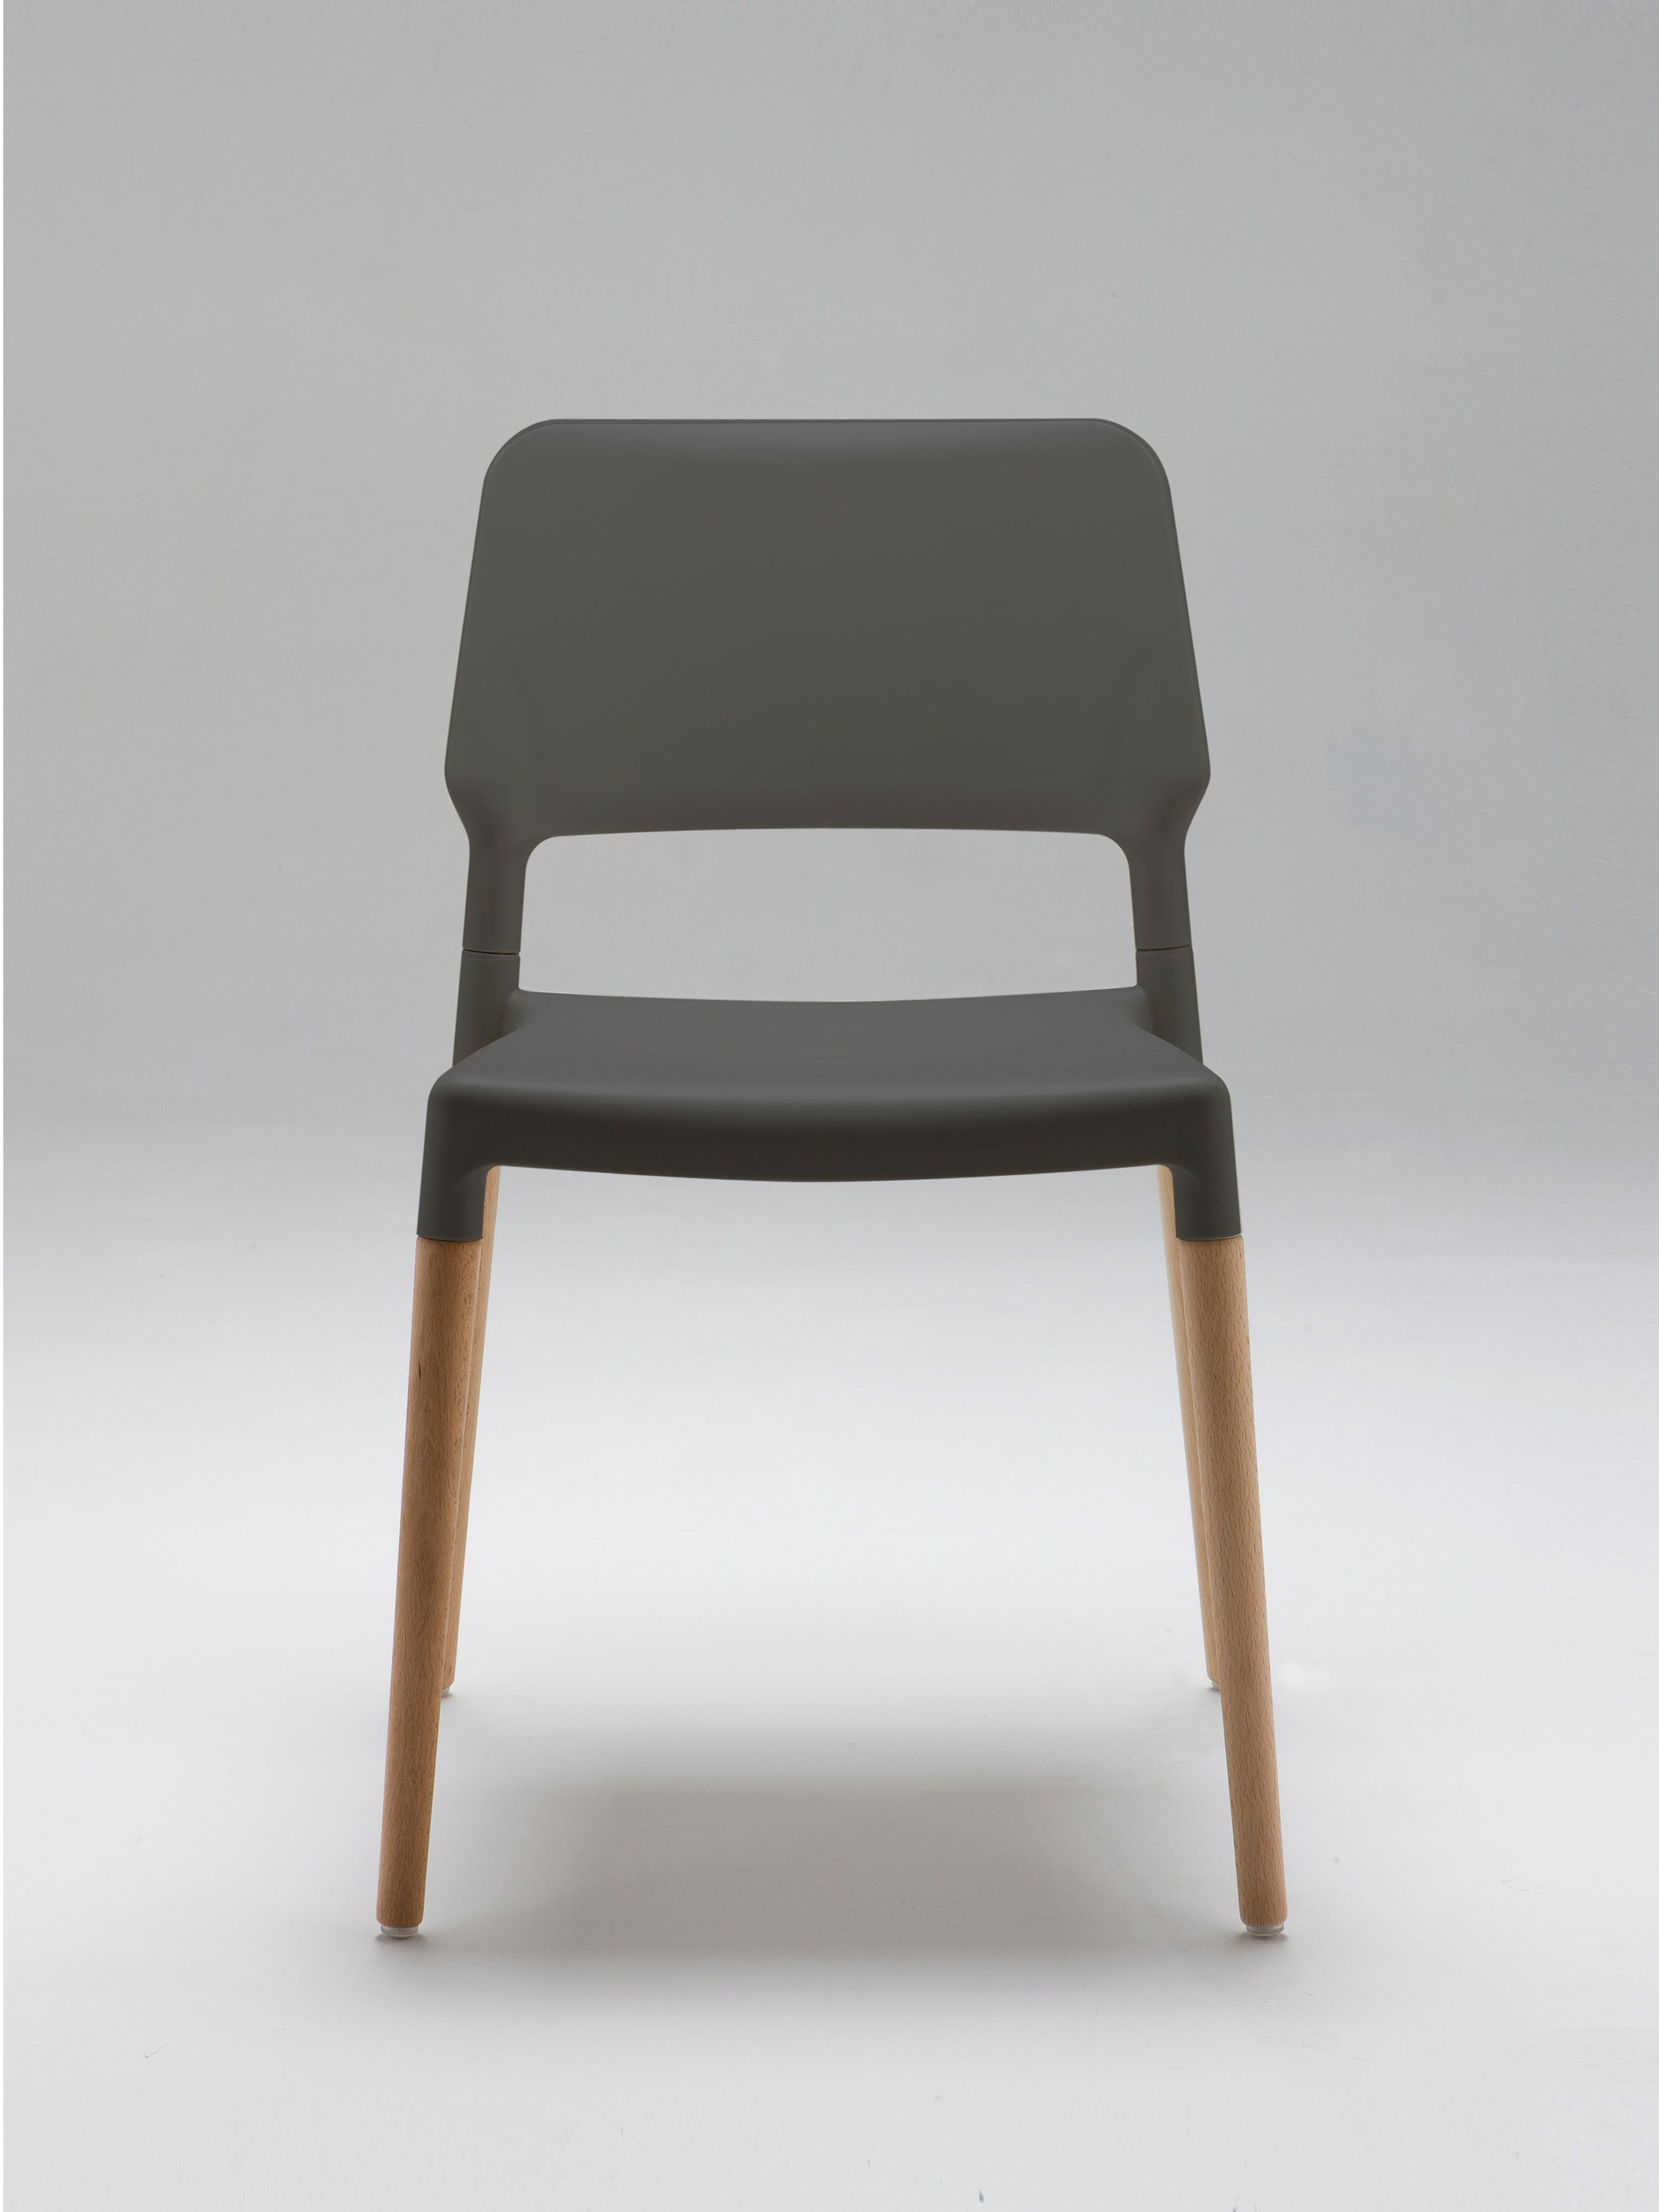 Set of 4 Belloch dining chair by Lagranja Design
Dimensions: D 50 x W 54 x H 79 cm
Materials: beech wood, polypropylene, fiberglass.
Available in other colors.

The Belloch chair is the result of commissioning a lightweight and stackable design.